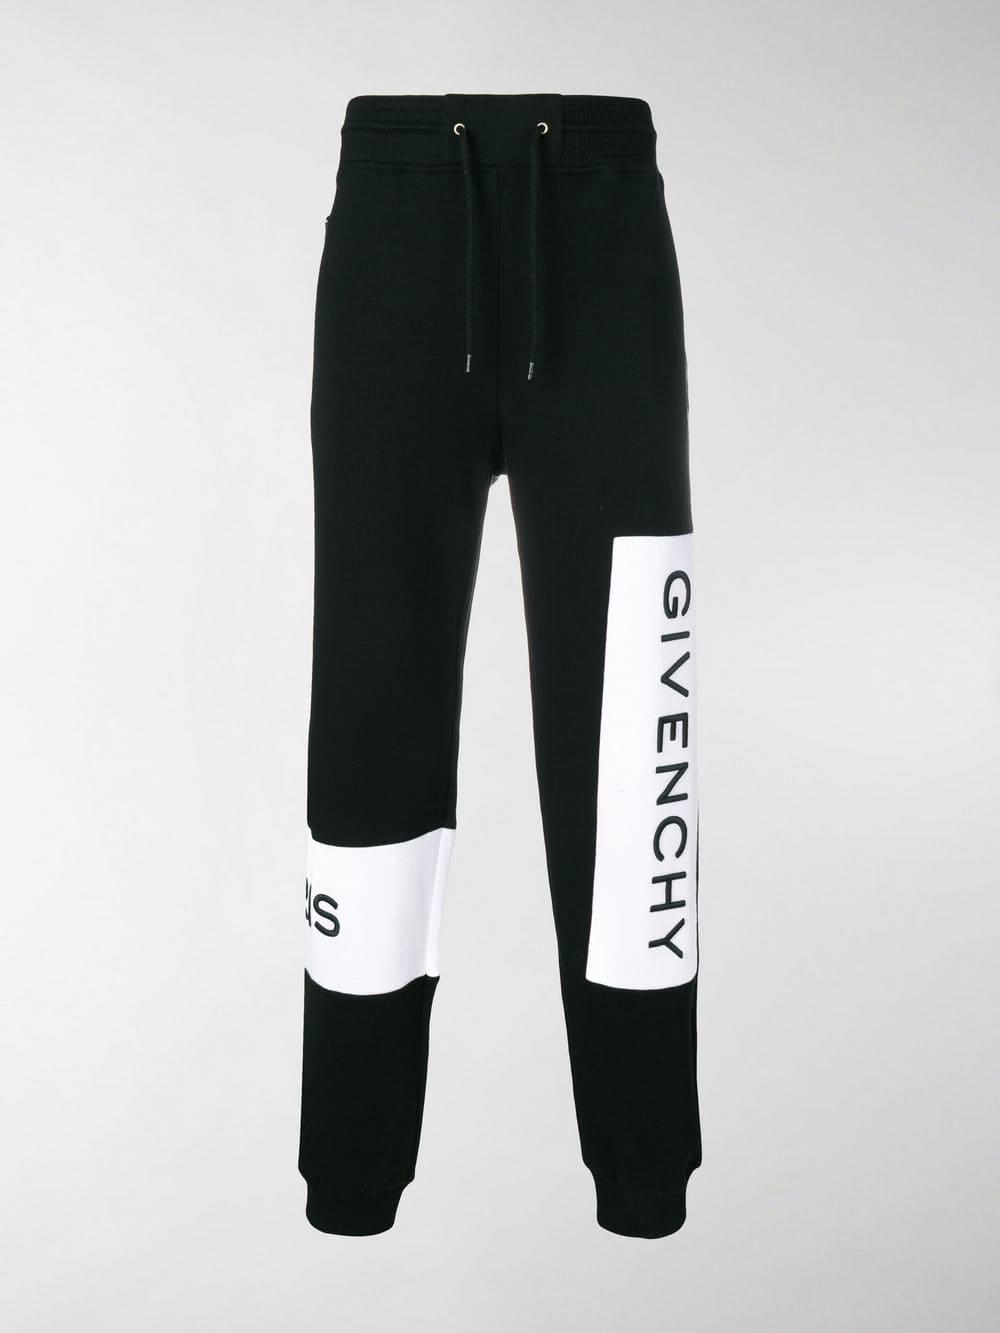 Givenchy Cotton Felpa Track Pants in Black for Men - Save 62% - Lyst